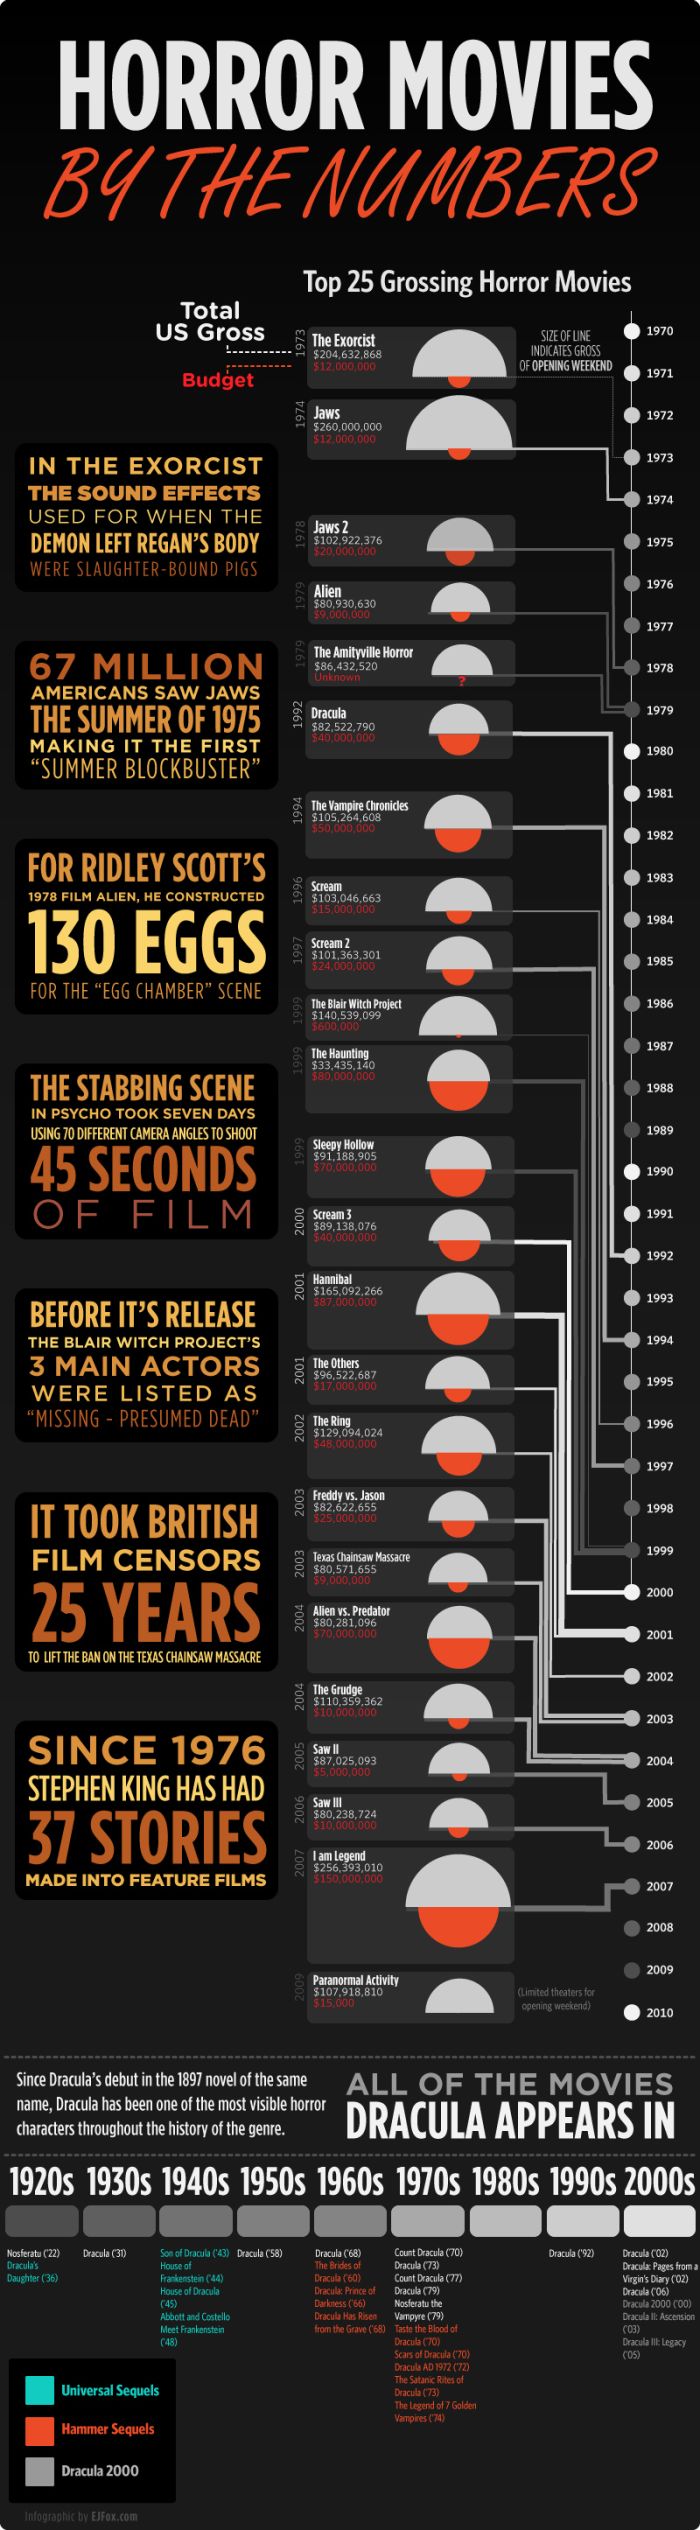 Horror Movies by the Numbers (infographic)